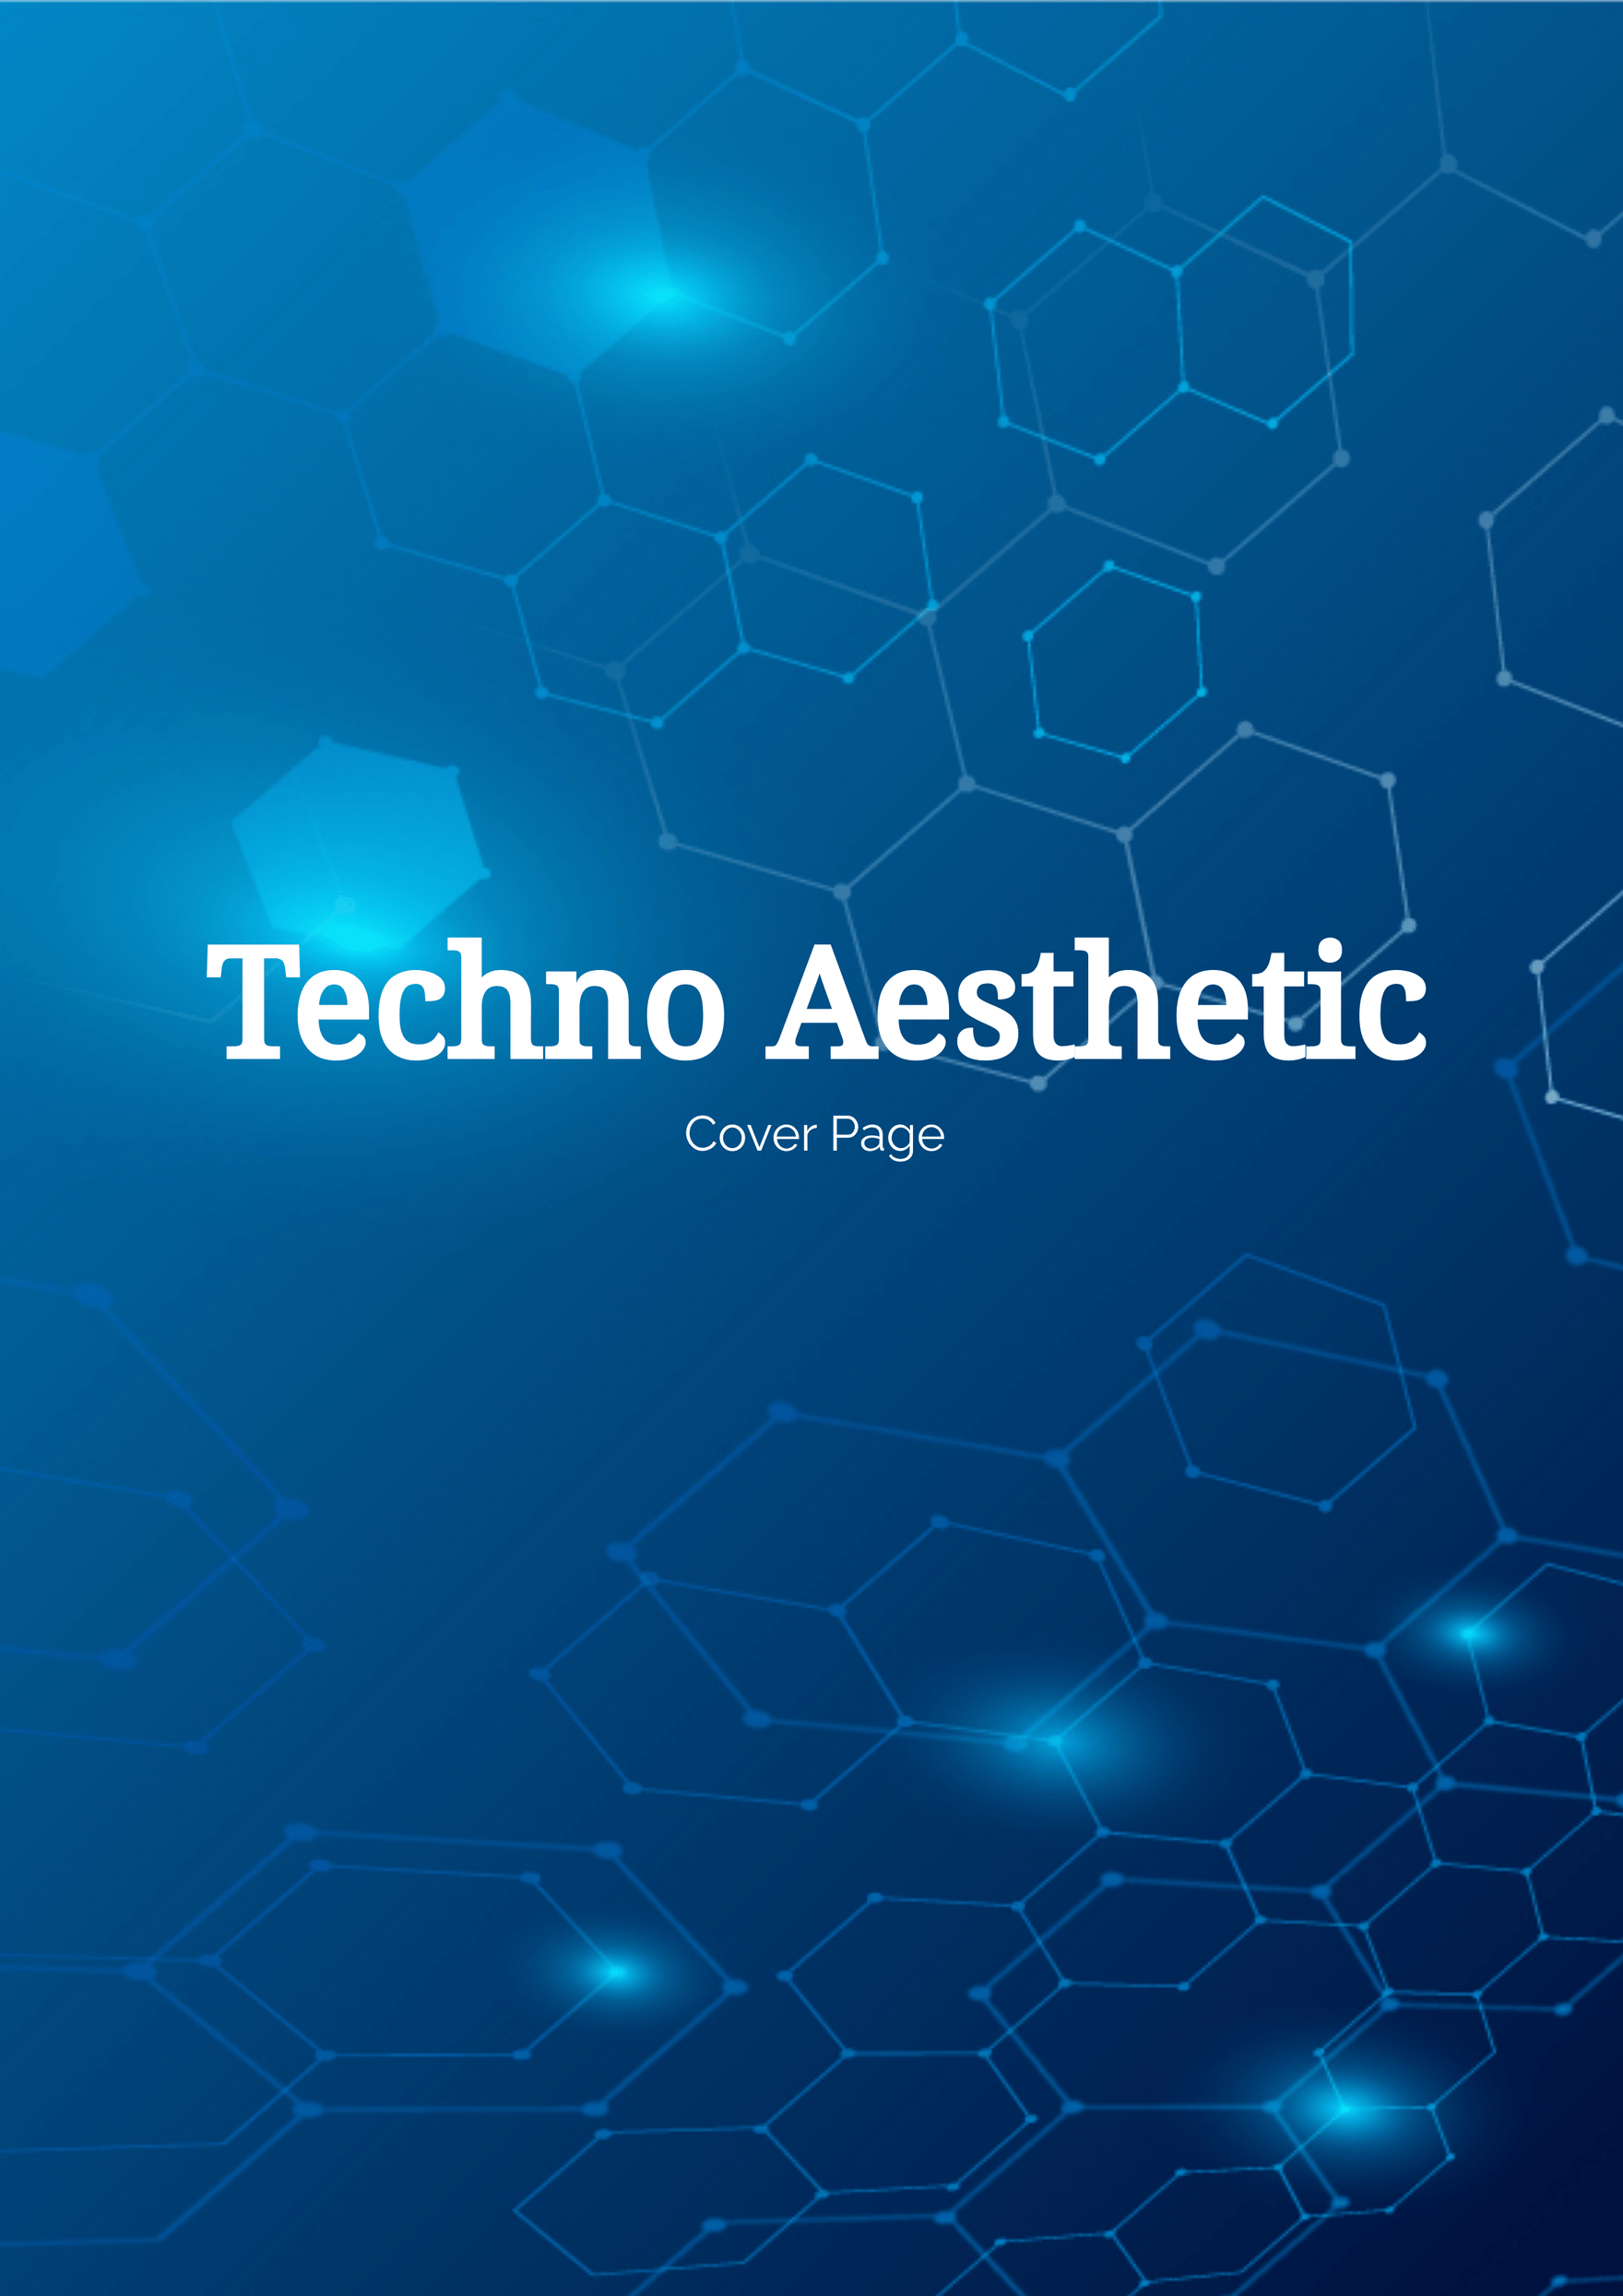 Techno Aesthetic Cover Page Template